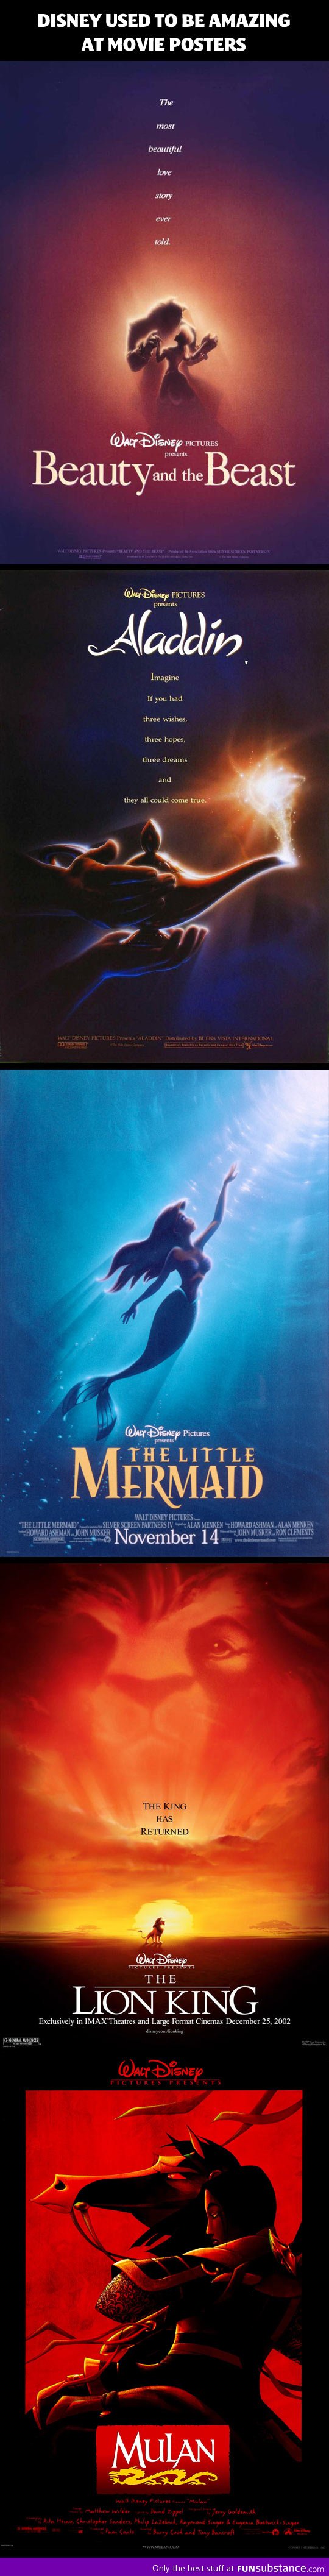 Disney used to be amazing at movie posters